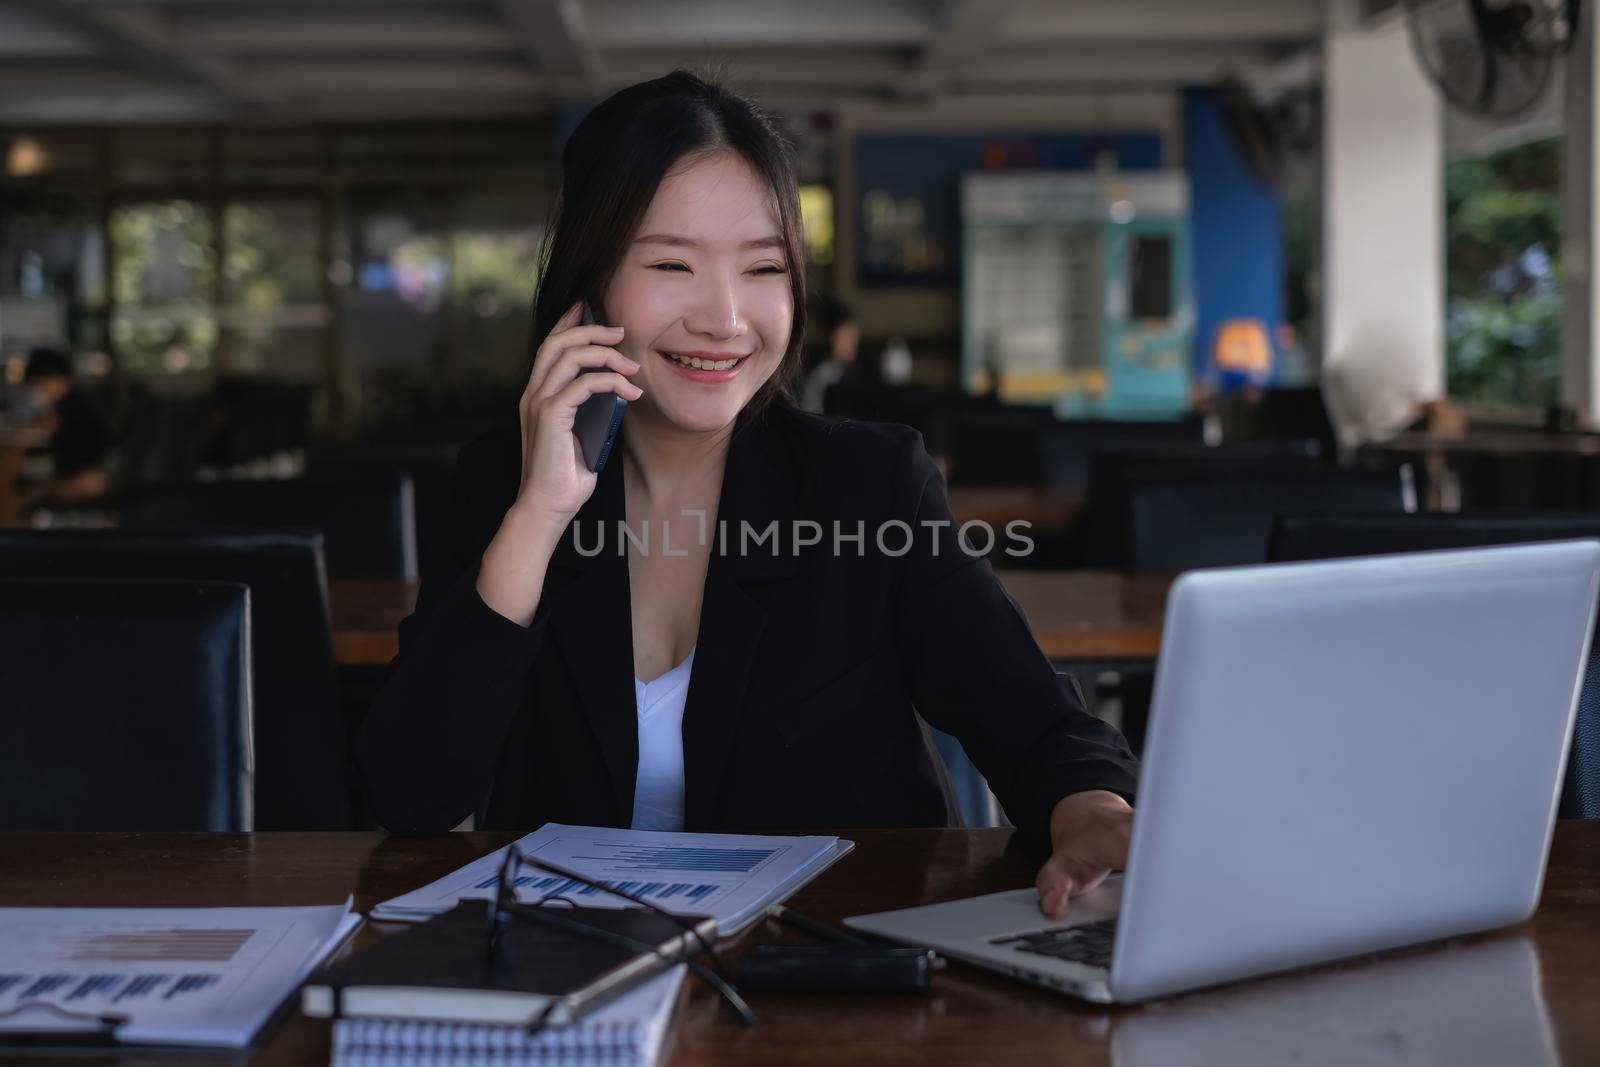 When she receives positive news from a customer, the happy businesswoman converses with her partners by cell phone